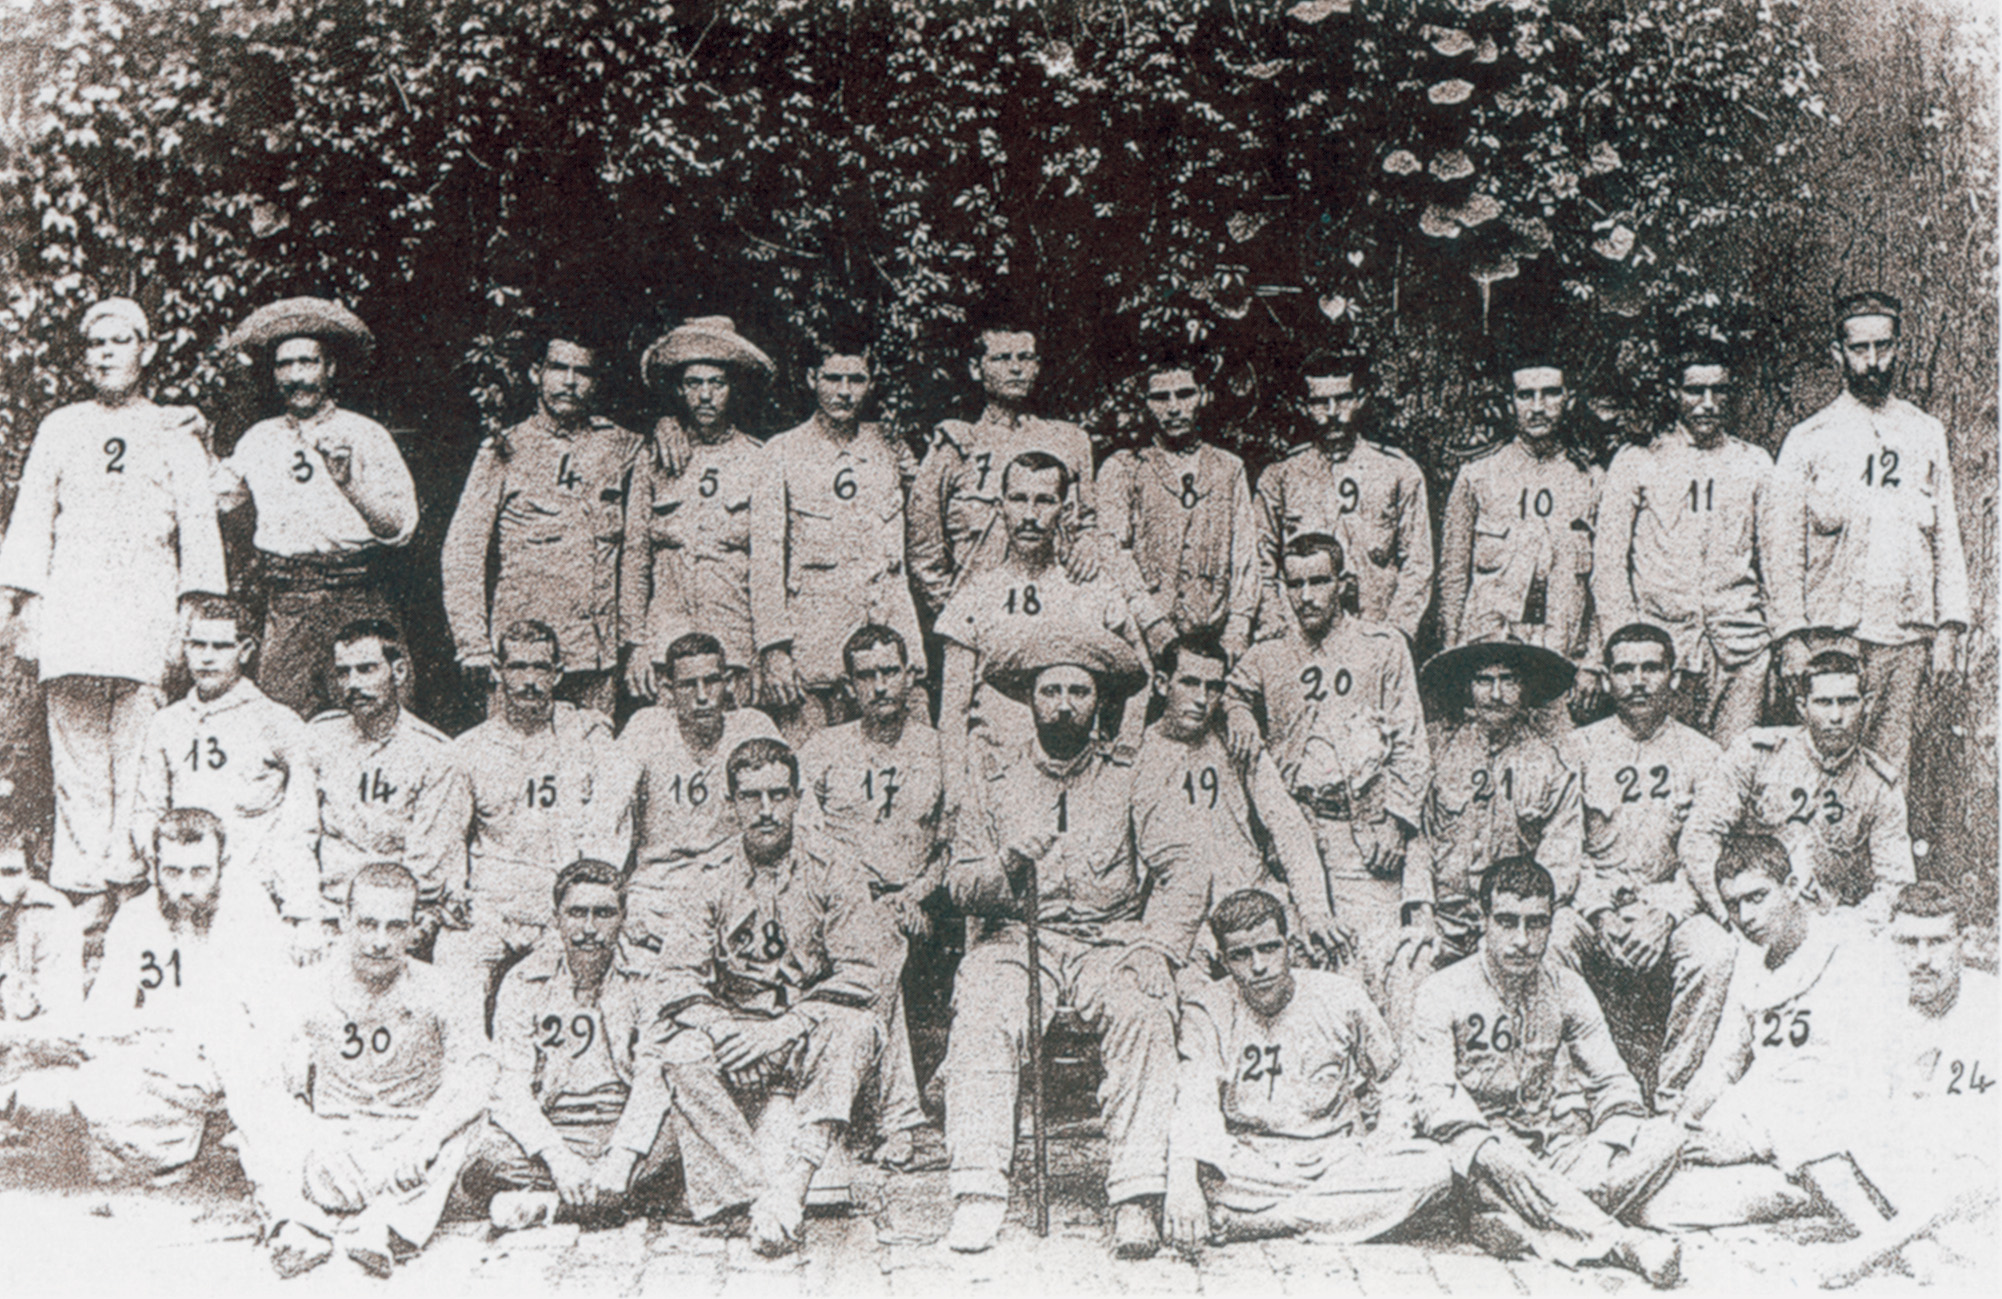 An assembly of Spanish survivors as they were photographed in Manila in July 1899. Martin Cerezo is seated at the center holding a cane. Upon their arrival in Spain later in the summer, these men were received as heroes. 